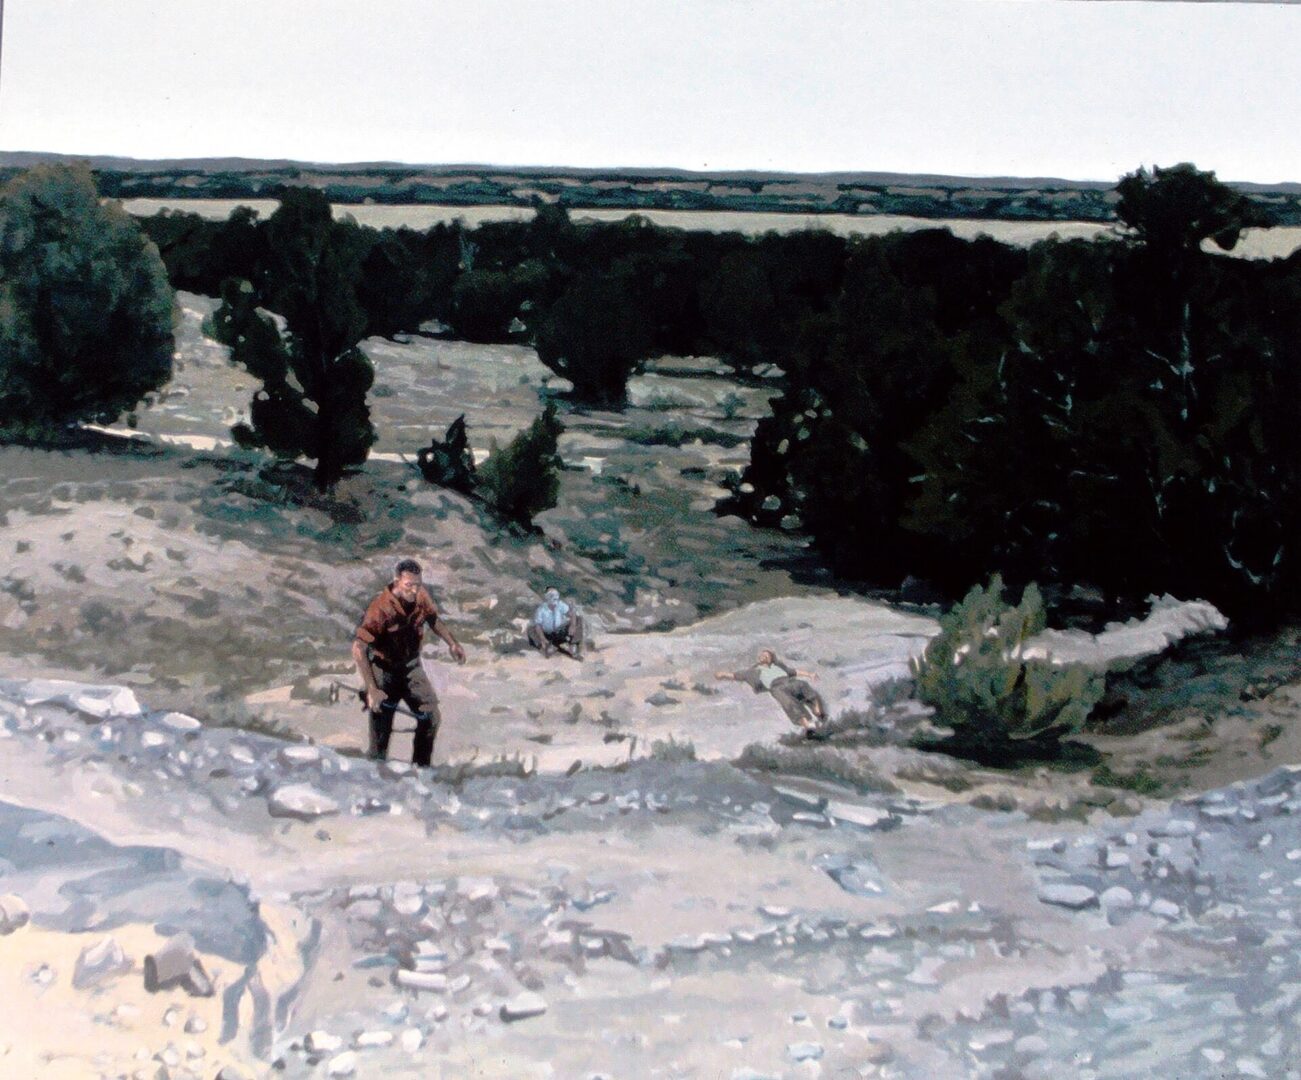 BEYOND THE RIVER<br>
1986<br>
40" x 48"
